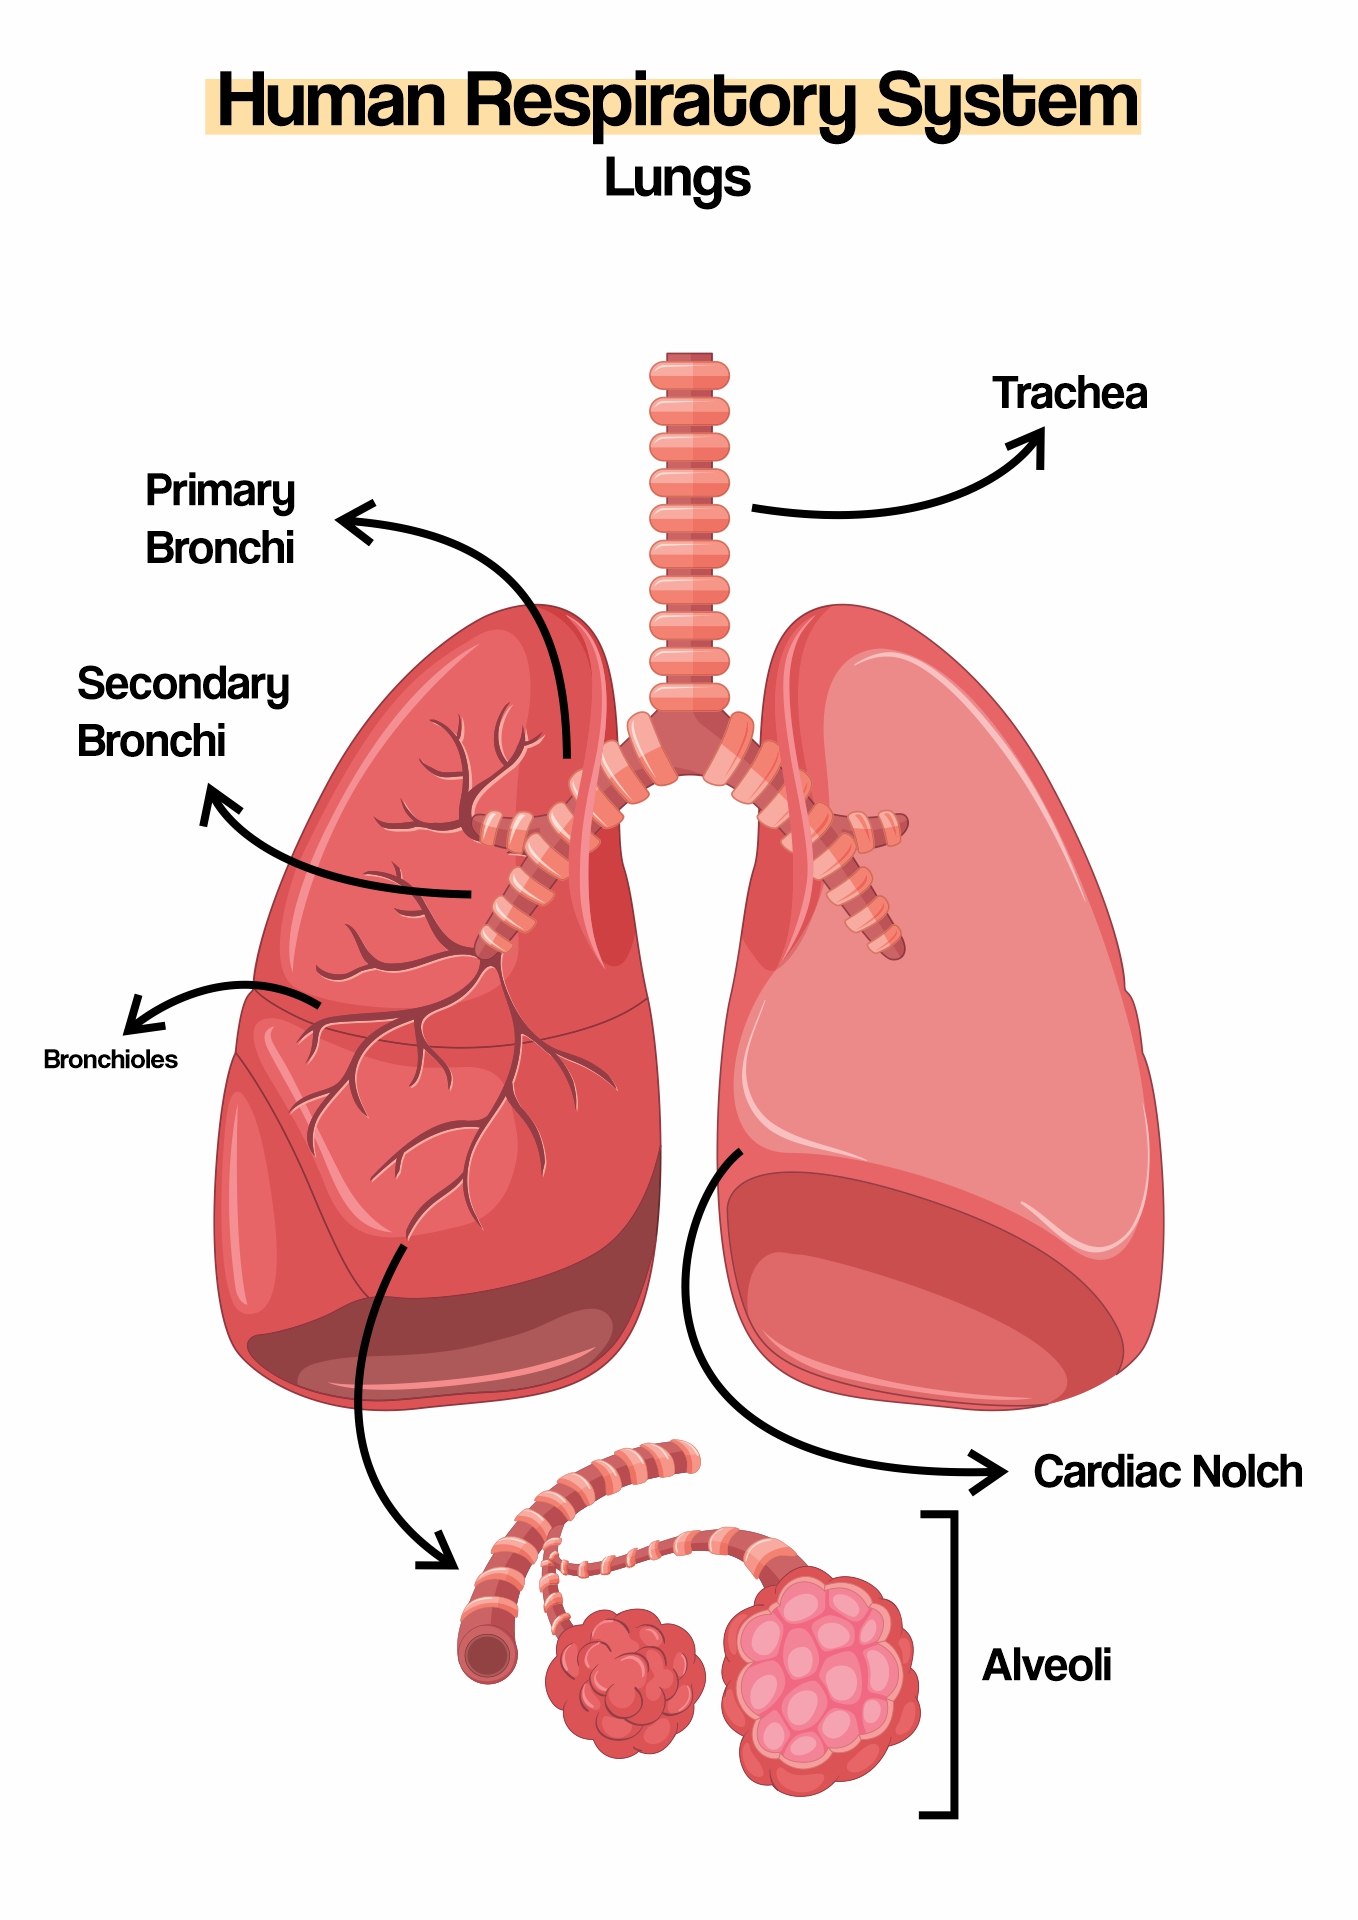 Parts of the Human Respiratory System Image